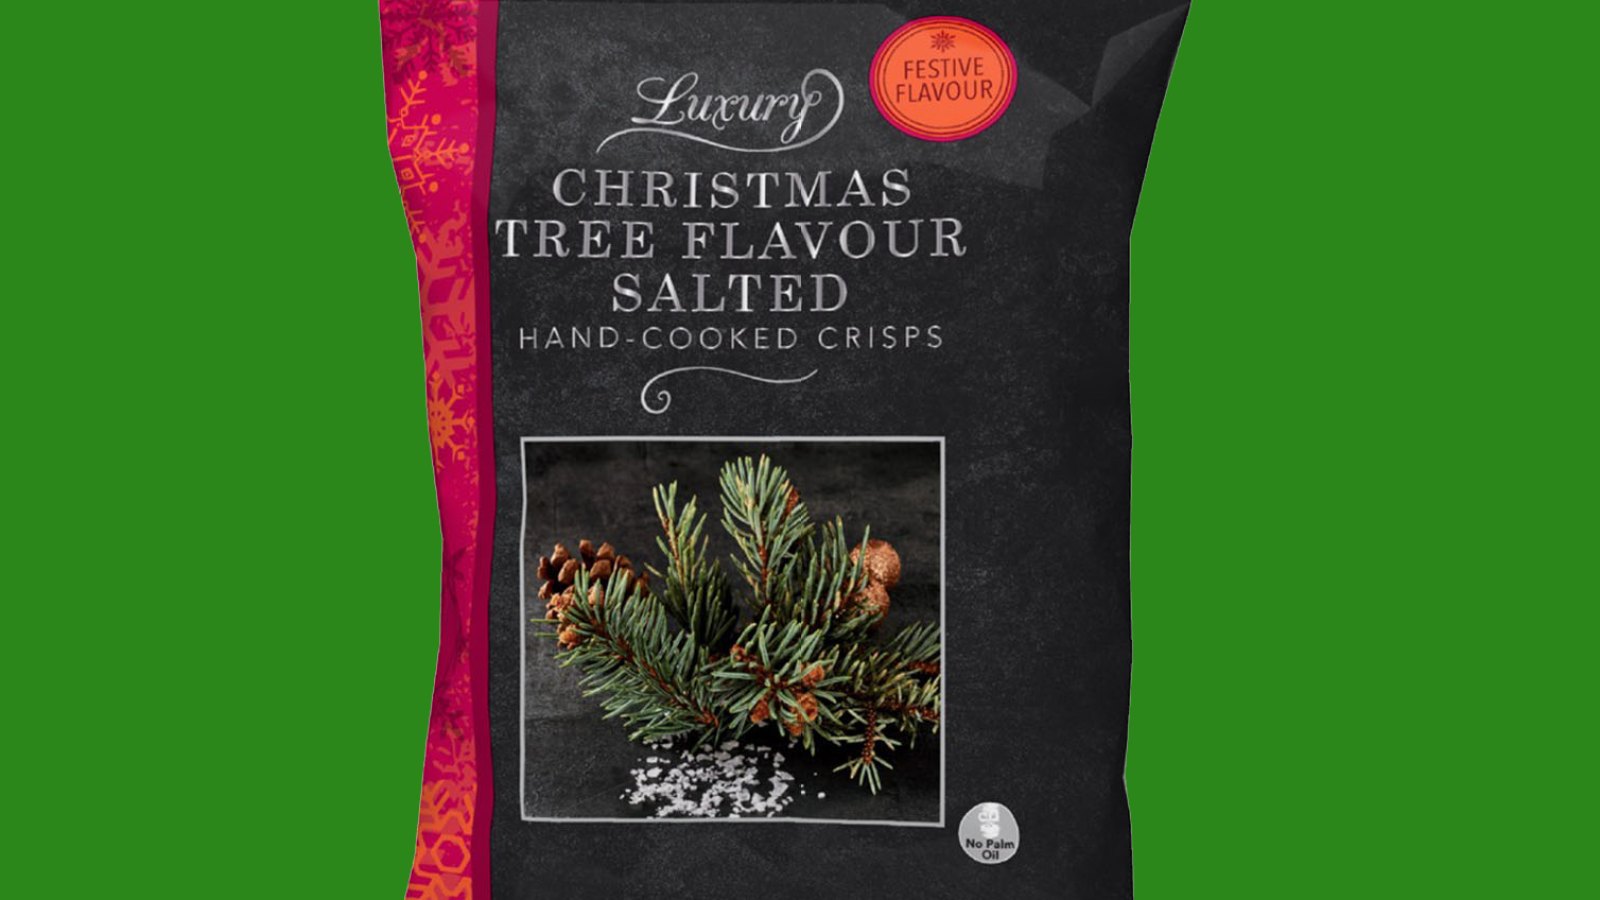 Iceland's Christmas Tree Flavoured Chips